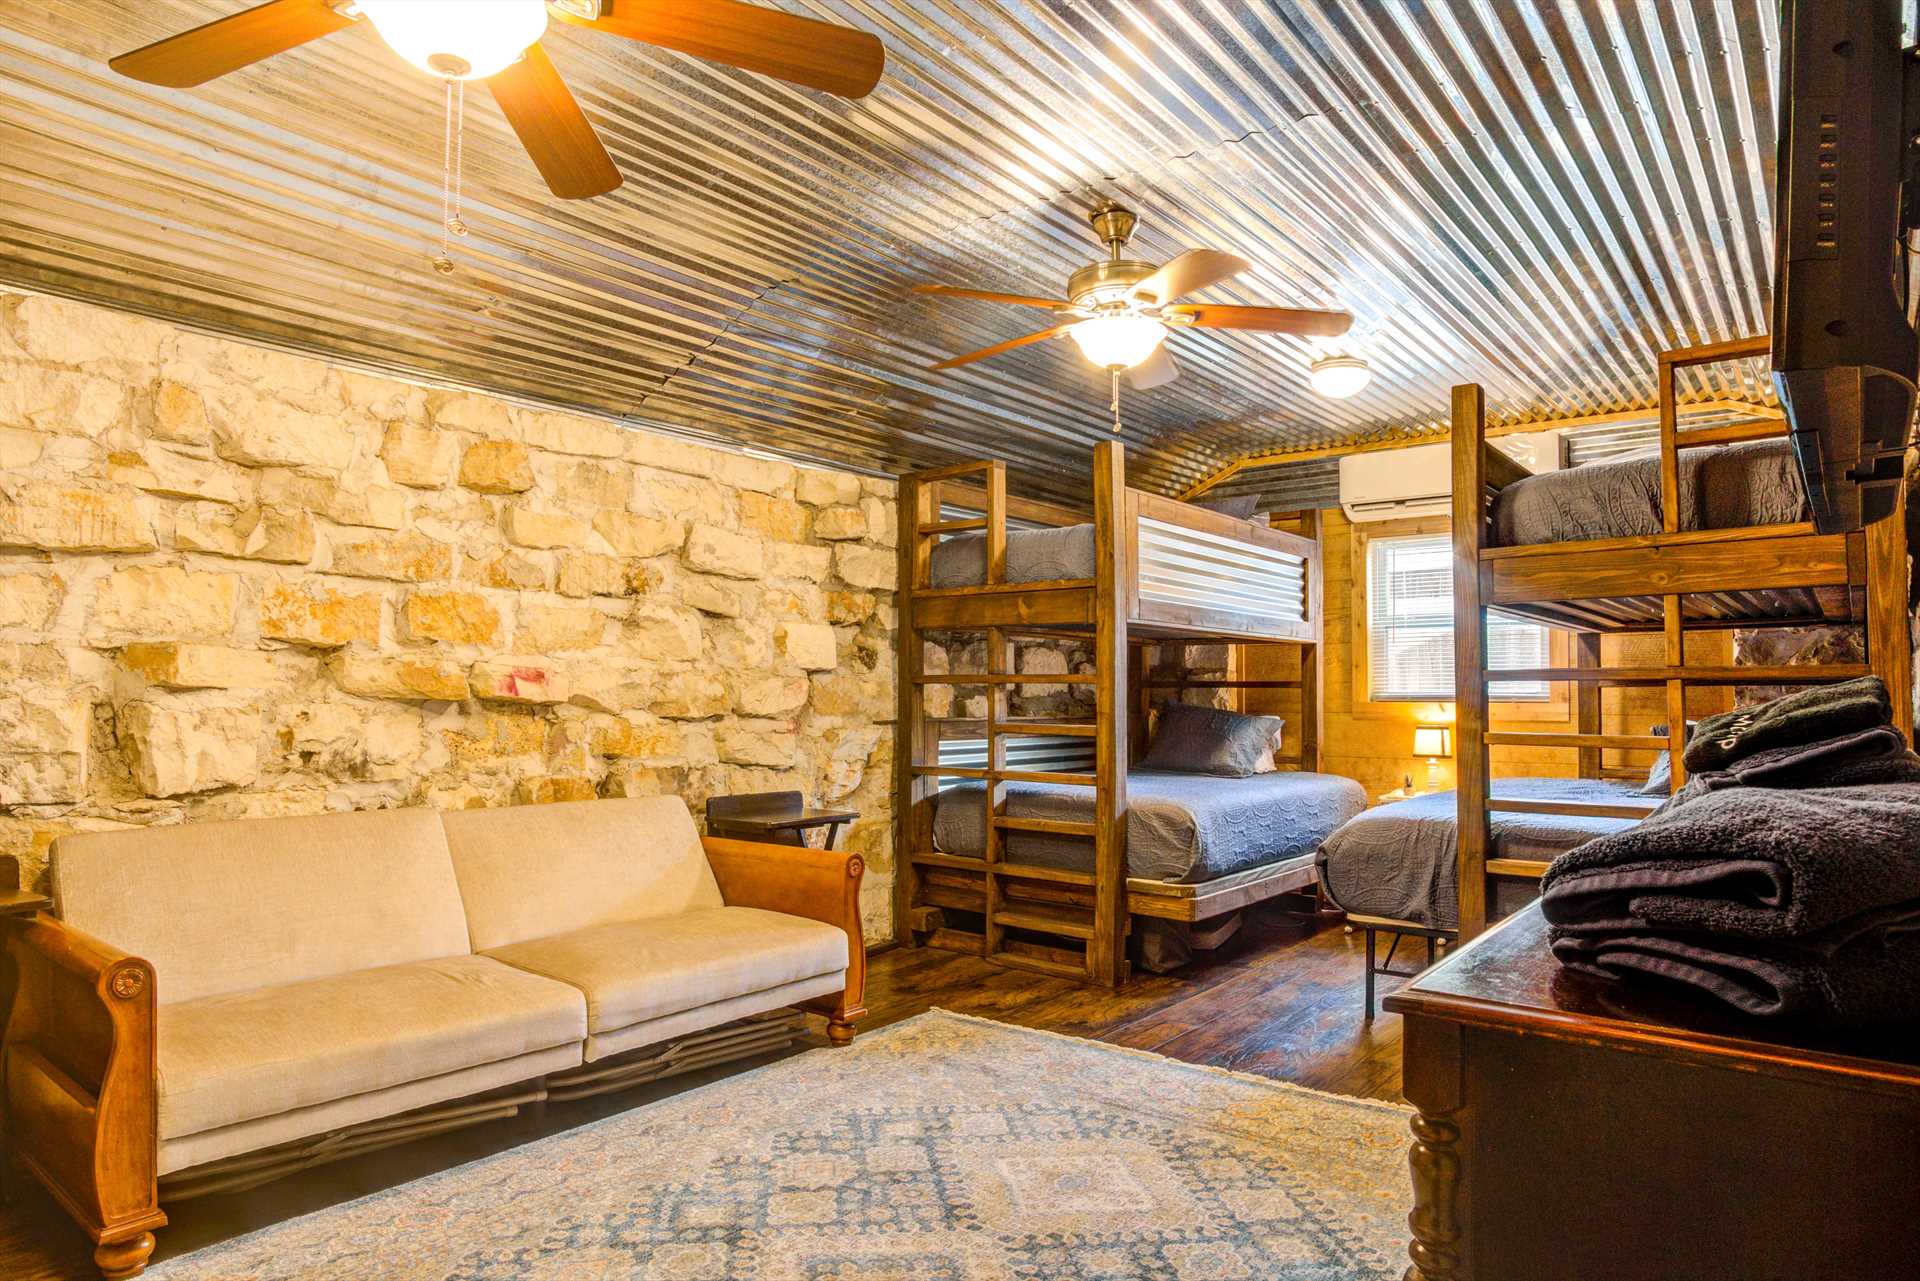                                                 Up to eight of your group can rest in the bunkhouse. Kids (and the young at heart) love the bunk bed setups!